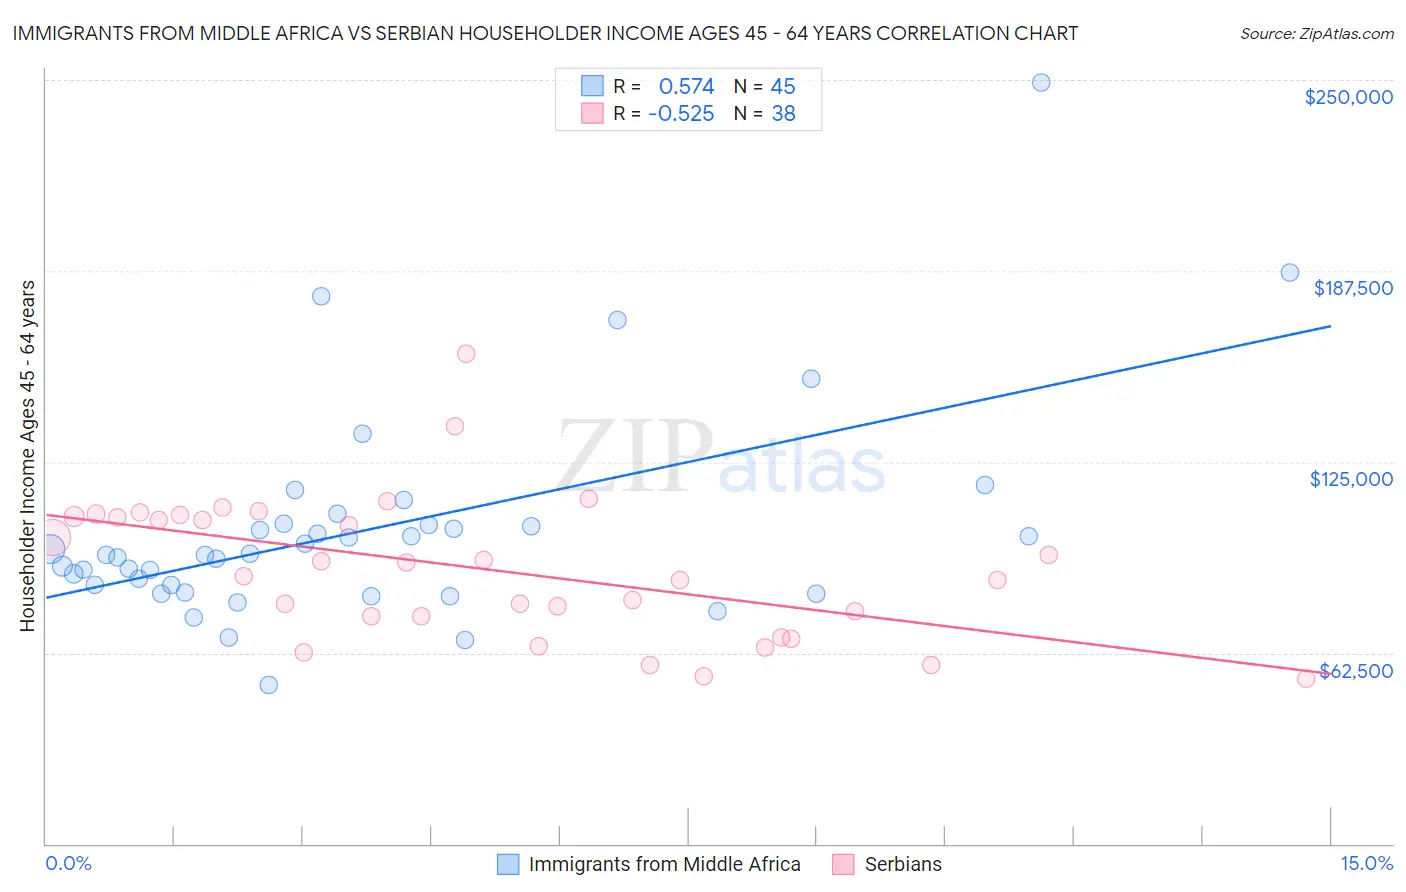 Immigrants from Middle Africa vs Serbian Householder Income Ages 45 - 64 years